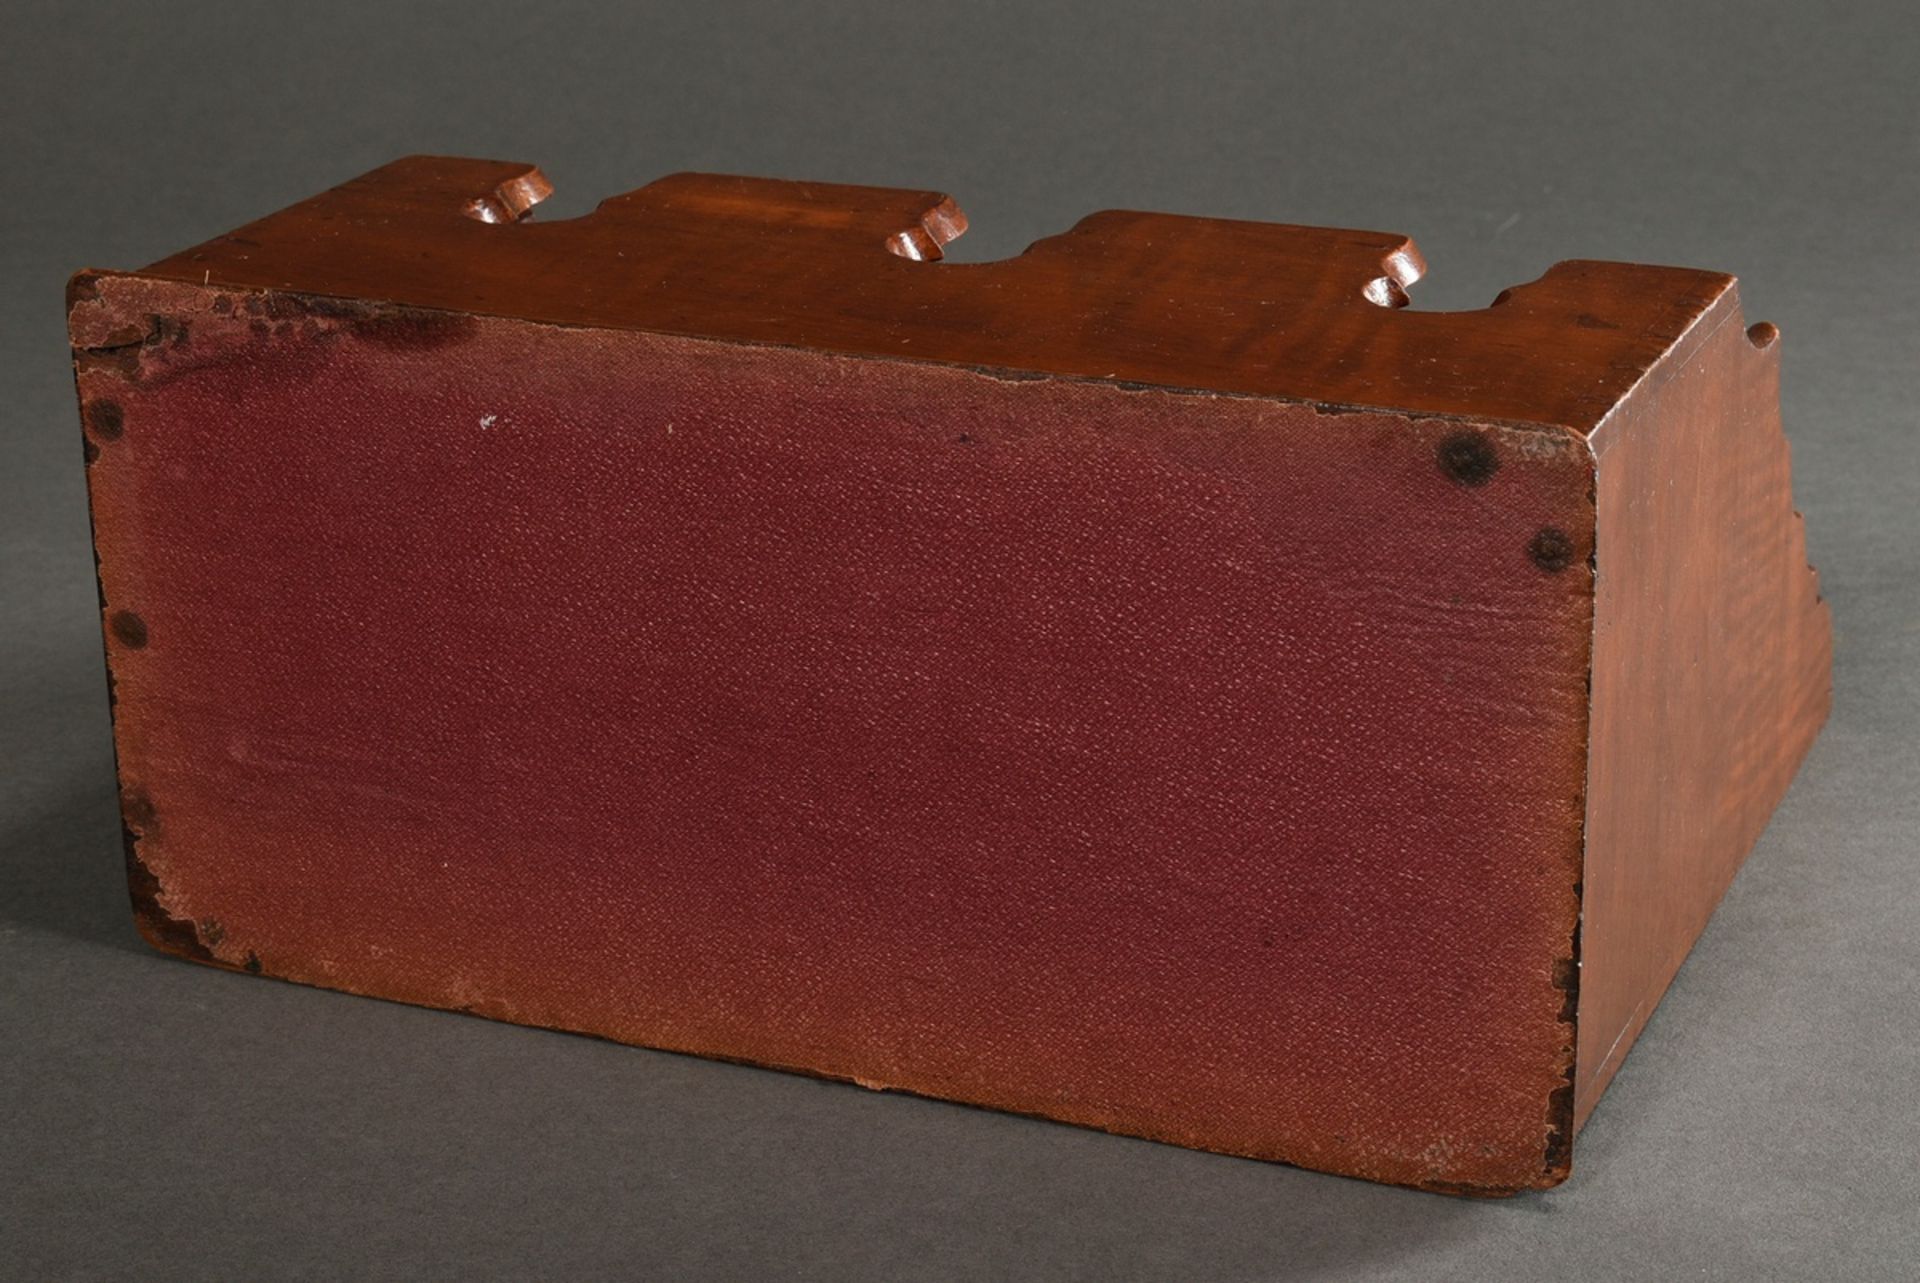 Mahogany letterbox with 10 staggered compartments, England approx. 1900, 26x30x14.7cm - Image 4 of 4